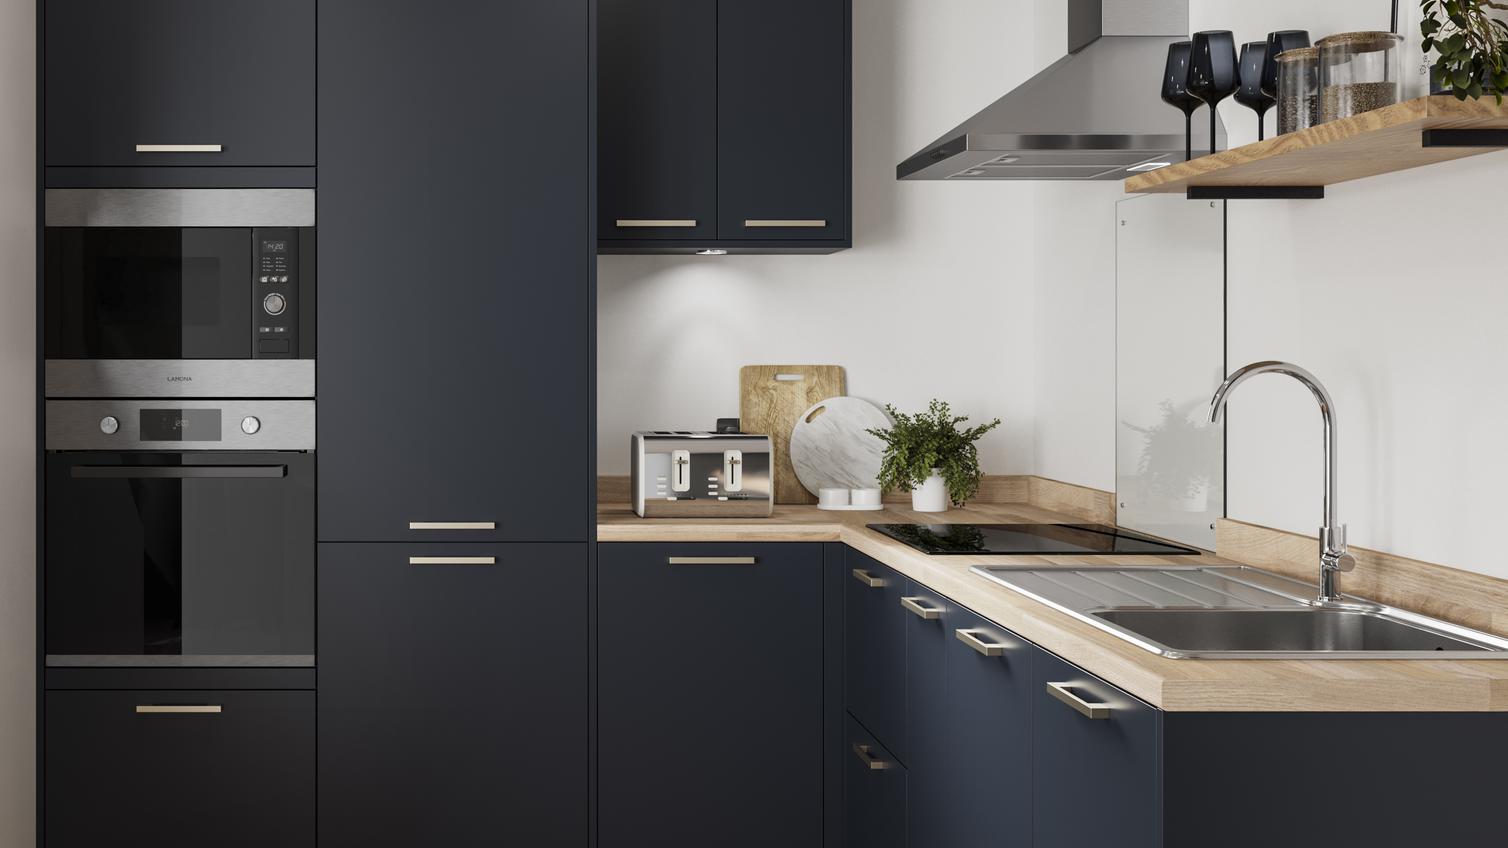 A compact blue kitchen idea in an L-shaped layout. Has a tower unit, with a built-in oven and microwave, and wood flooring.